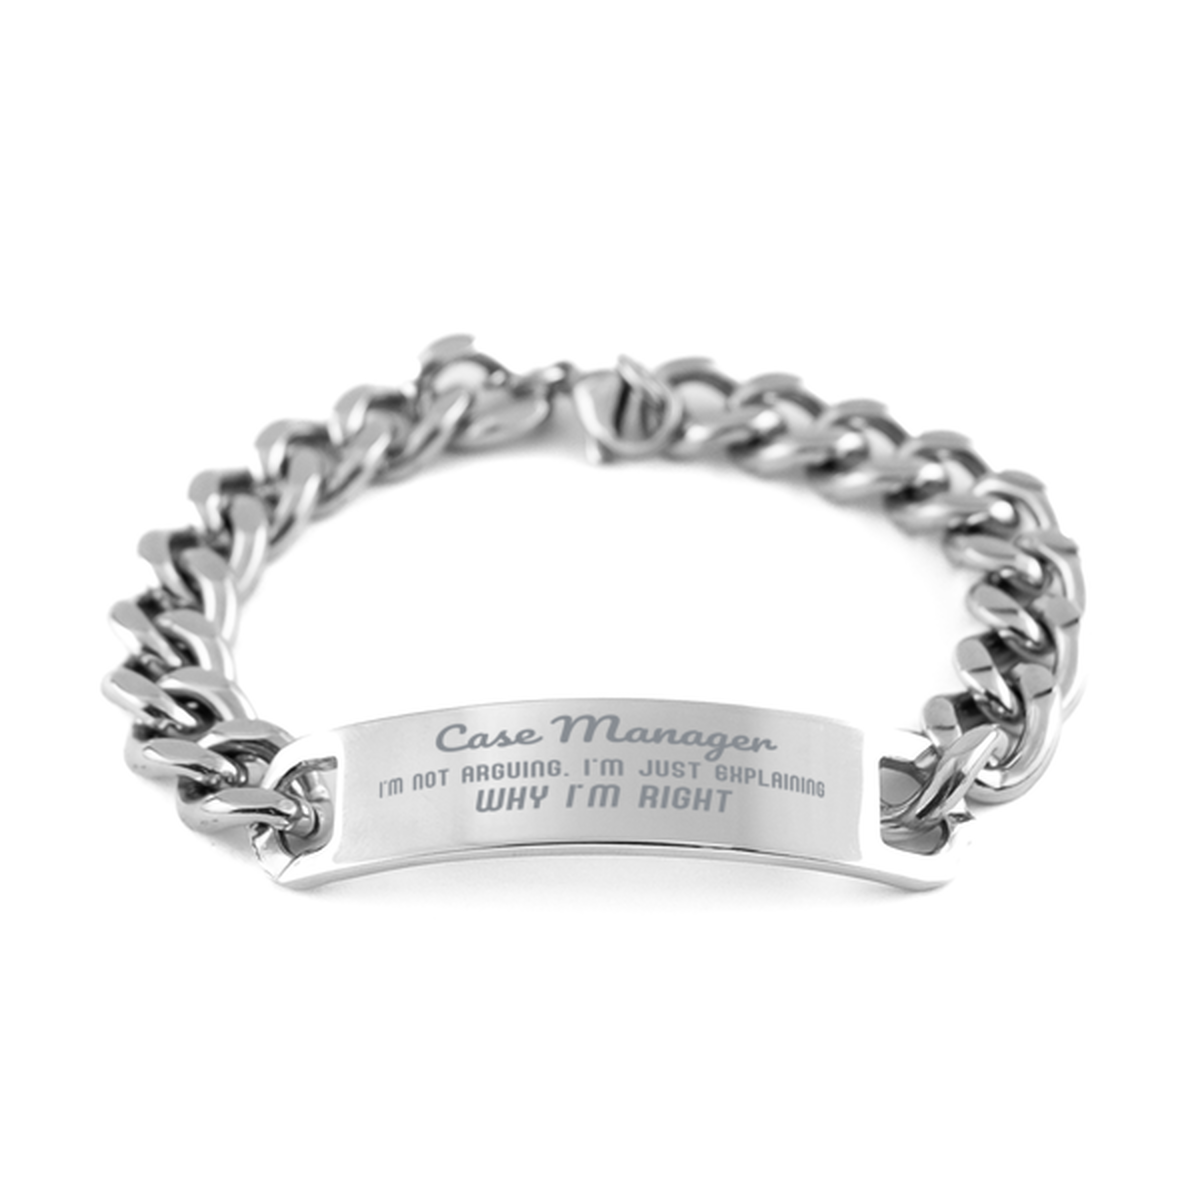 Case Manager I'm not Arguing. I'm Just Explaining Why I'm RIGHT Cuban Chain Stainless Steel Bracelet, Graduation Birthday Christmas Case Manager Gifts For Case Manager Funny Saying Quote Present for Men Women Coworker